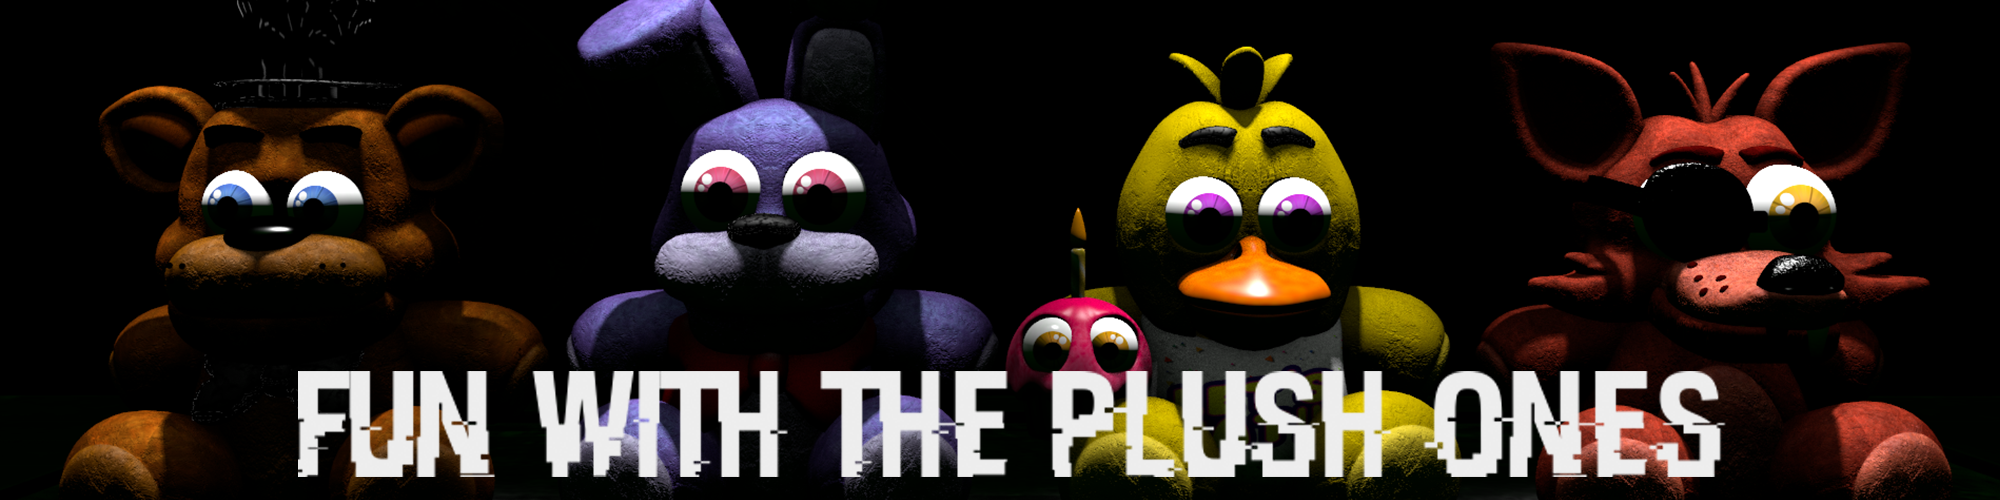 Fun With the Plush Ones